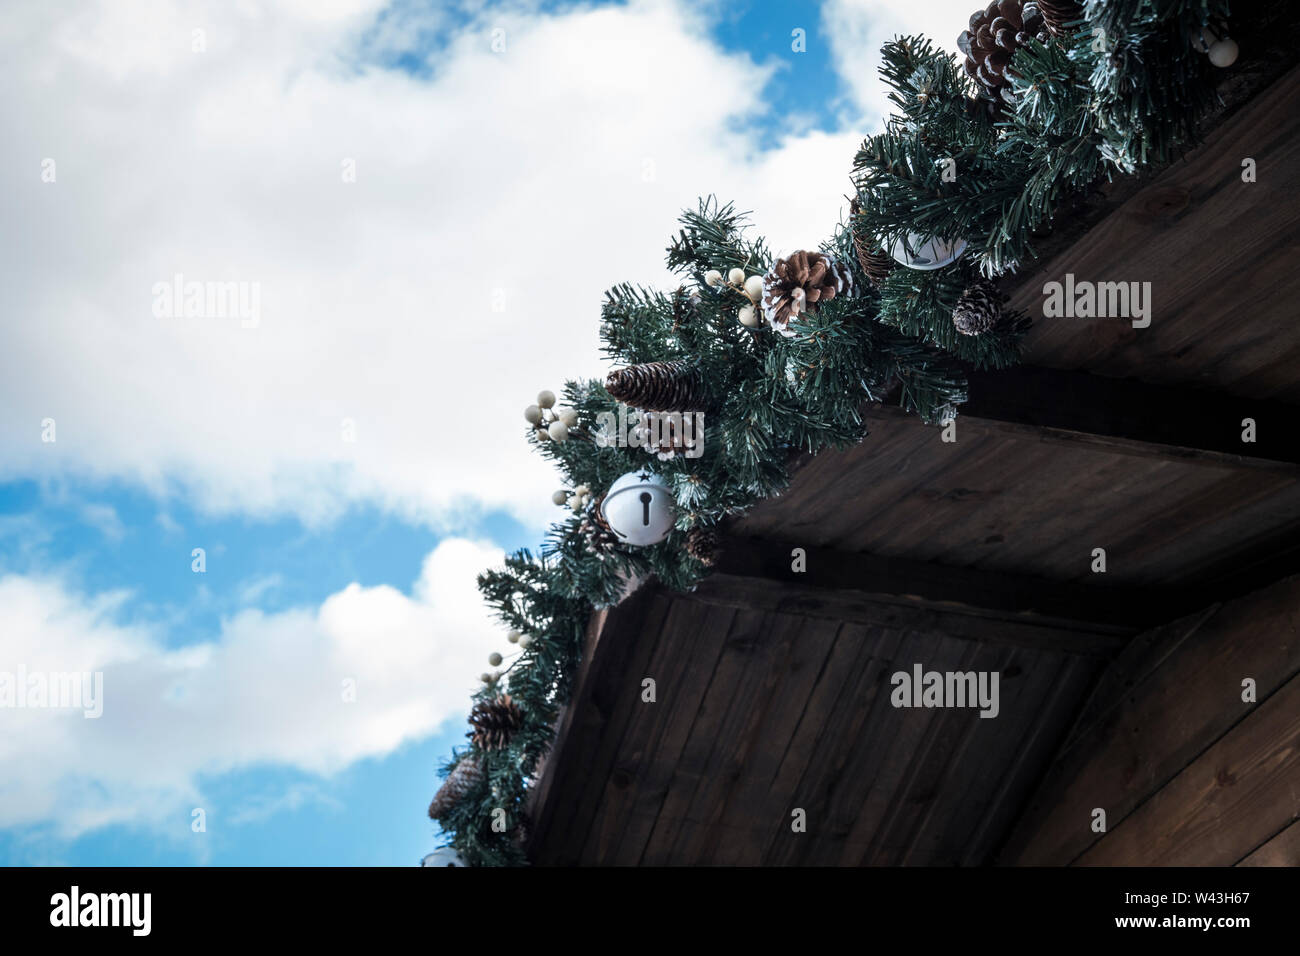 Christmas decorations on roof of wooden hut Stock Photo